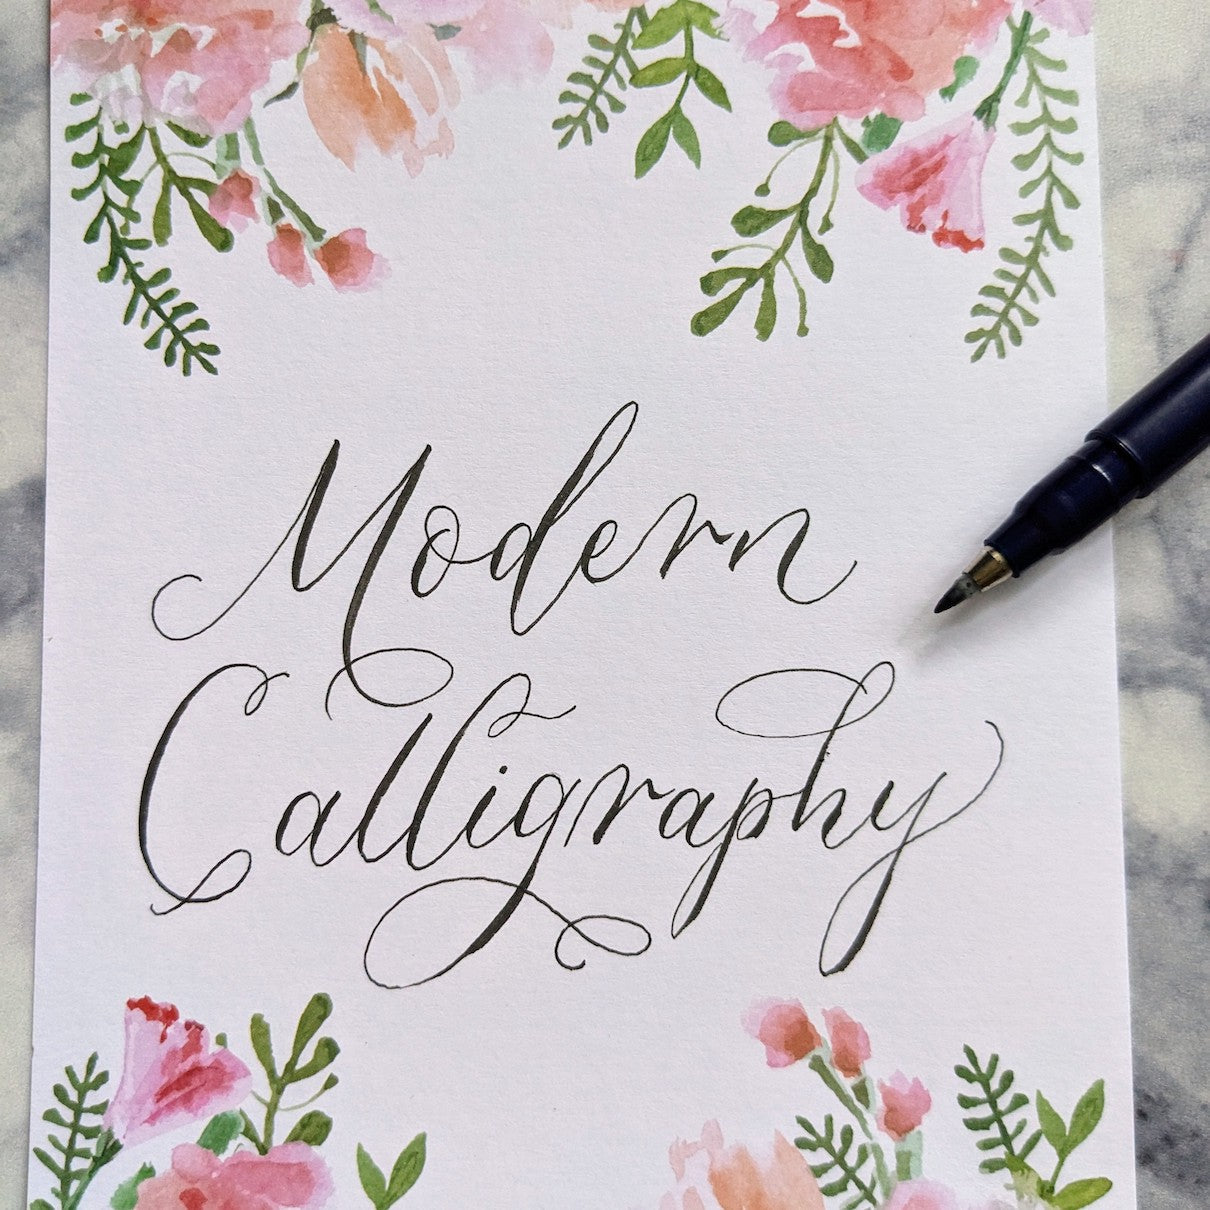 The Paper Seahorse Classes November 4th 12 -3p Modern Calligraphy